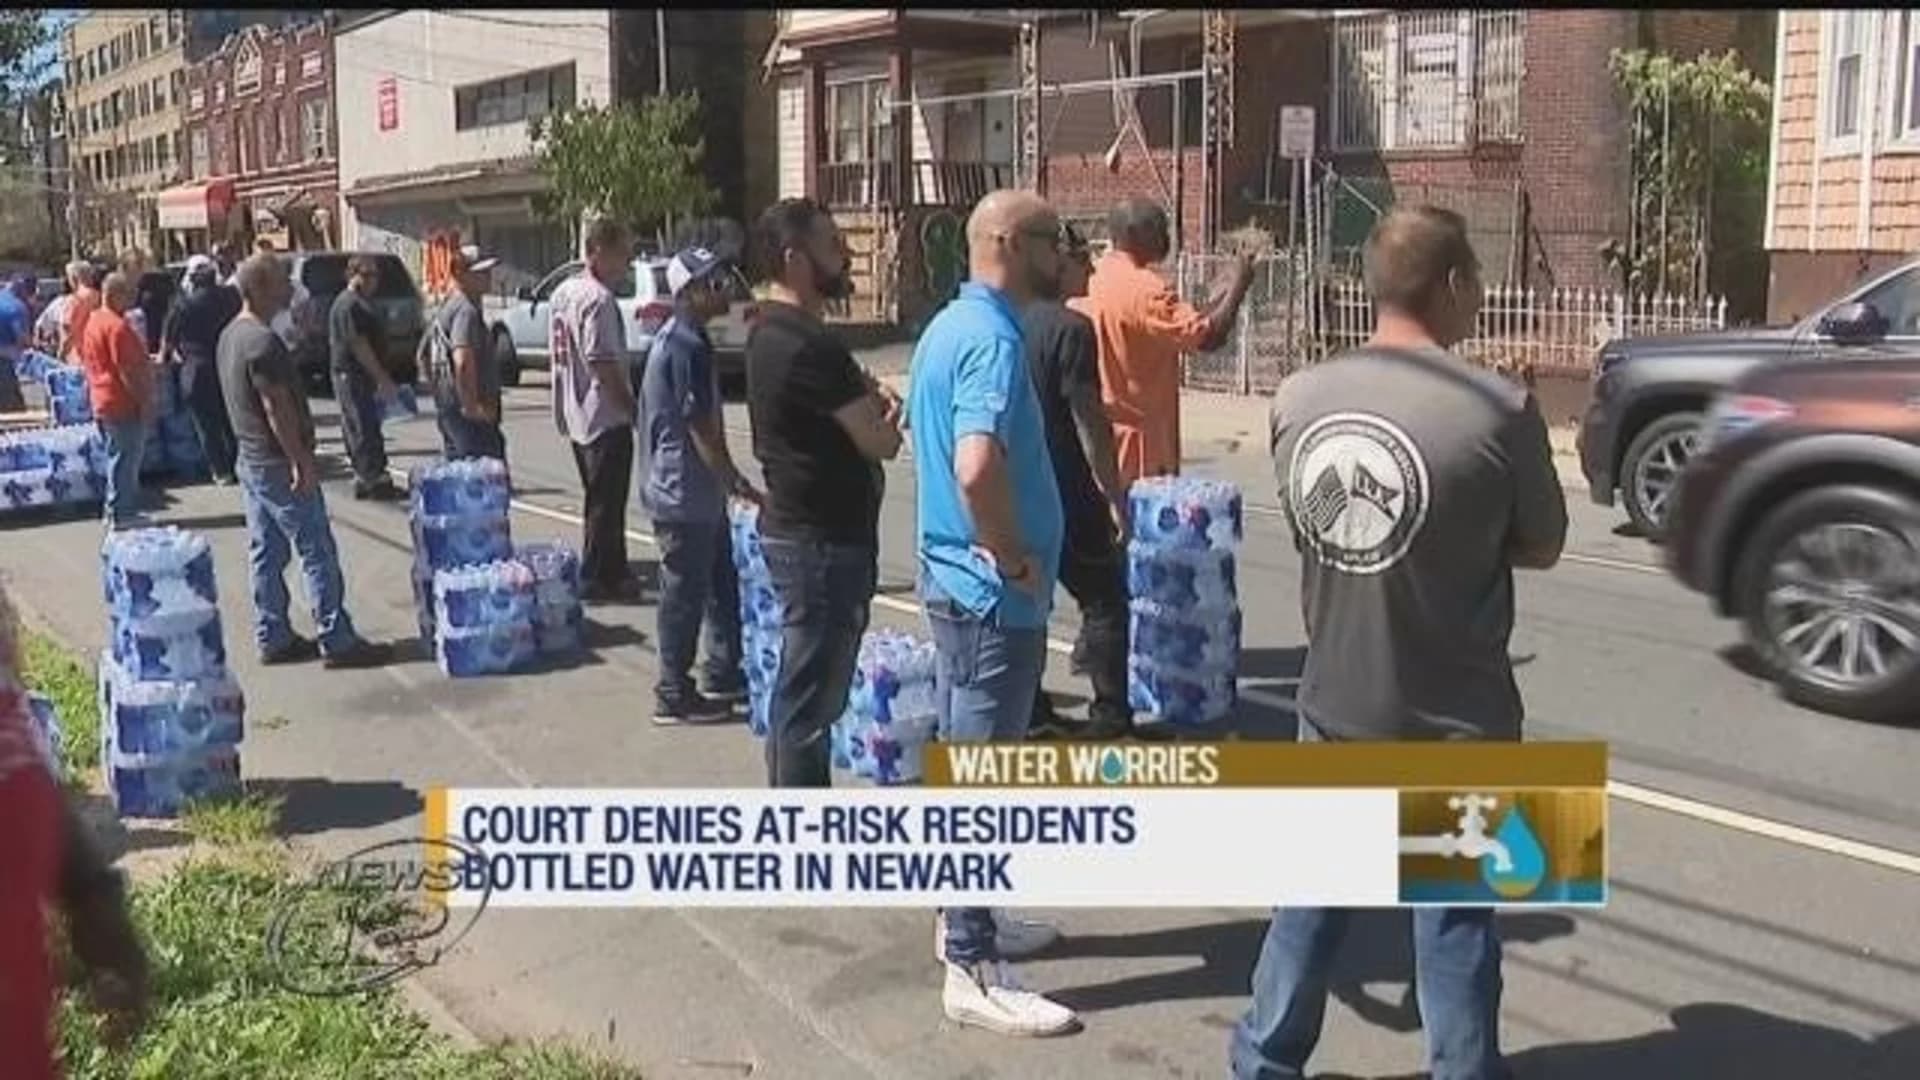 Judge: Newark areas covered by Wanaque system not eligible for bottled water